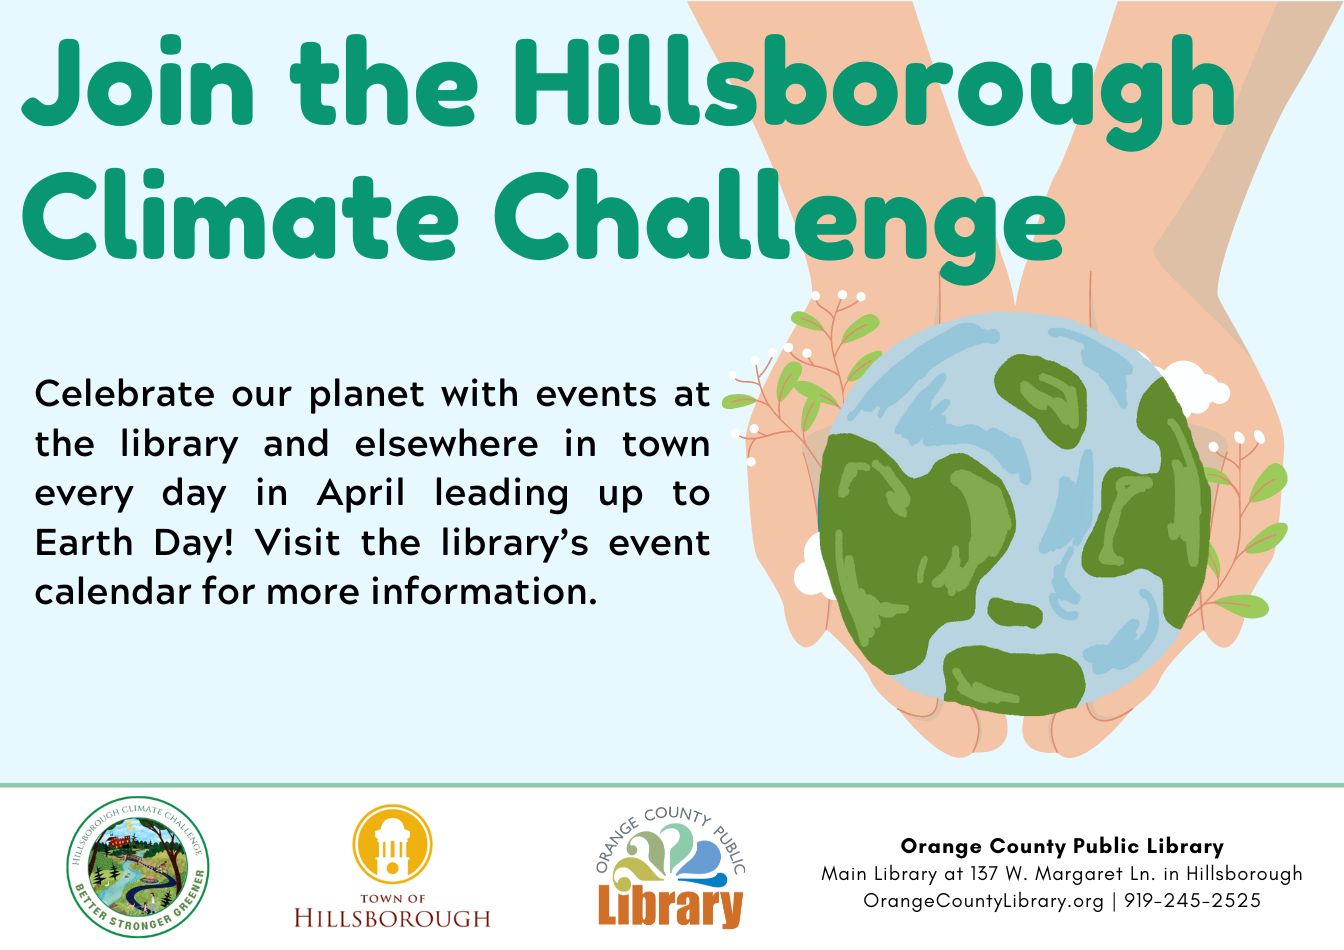 How to Reduce Your Home’s Carbon Footprint - Hillsborough Climate Challenge